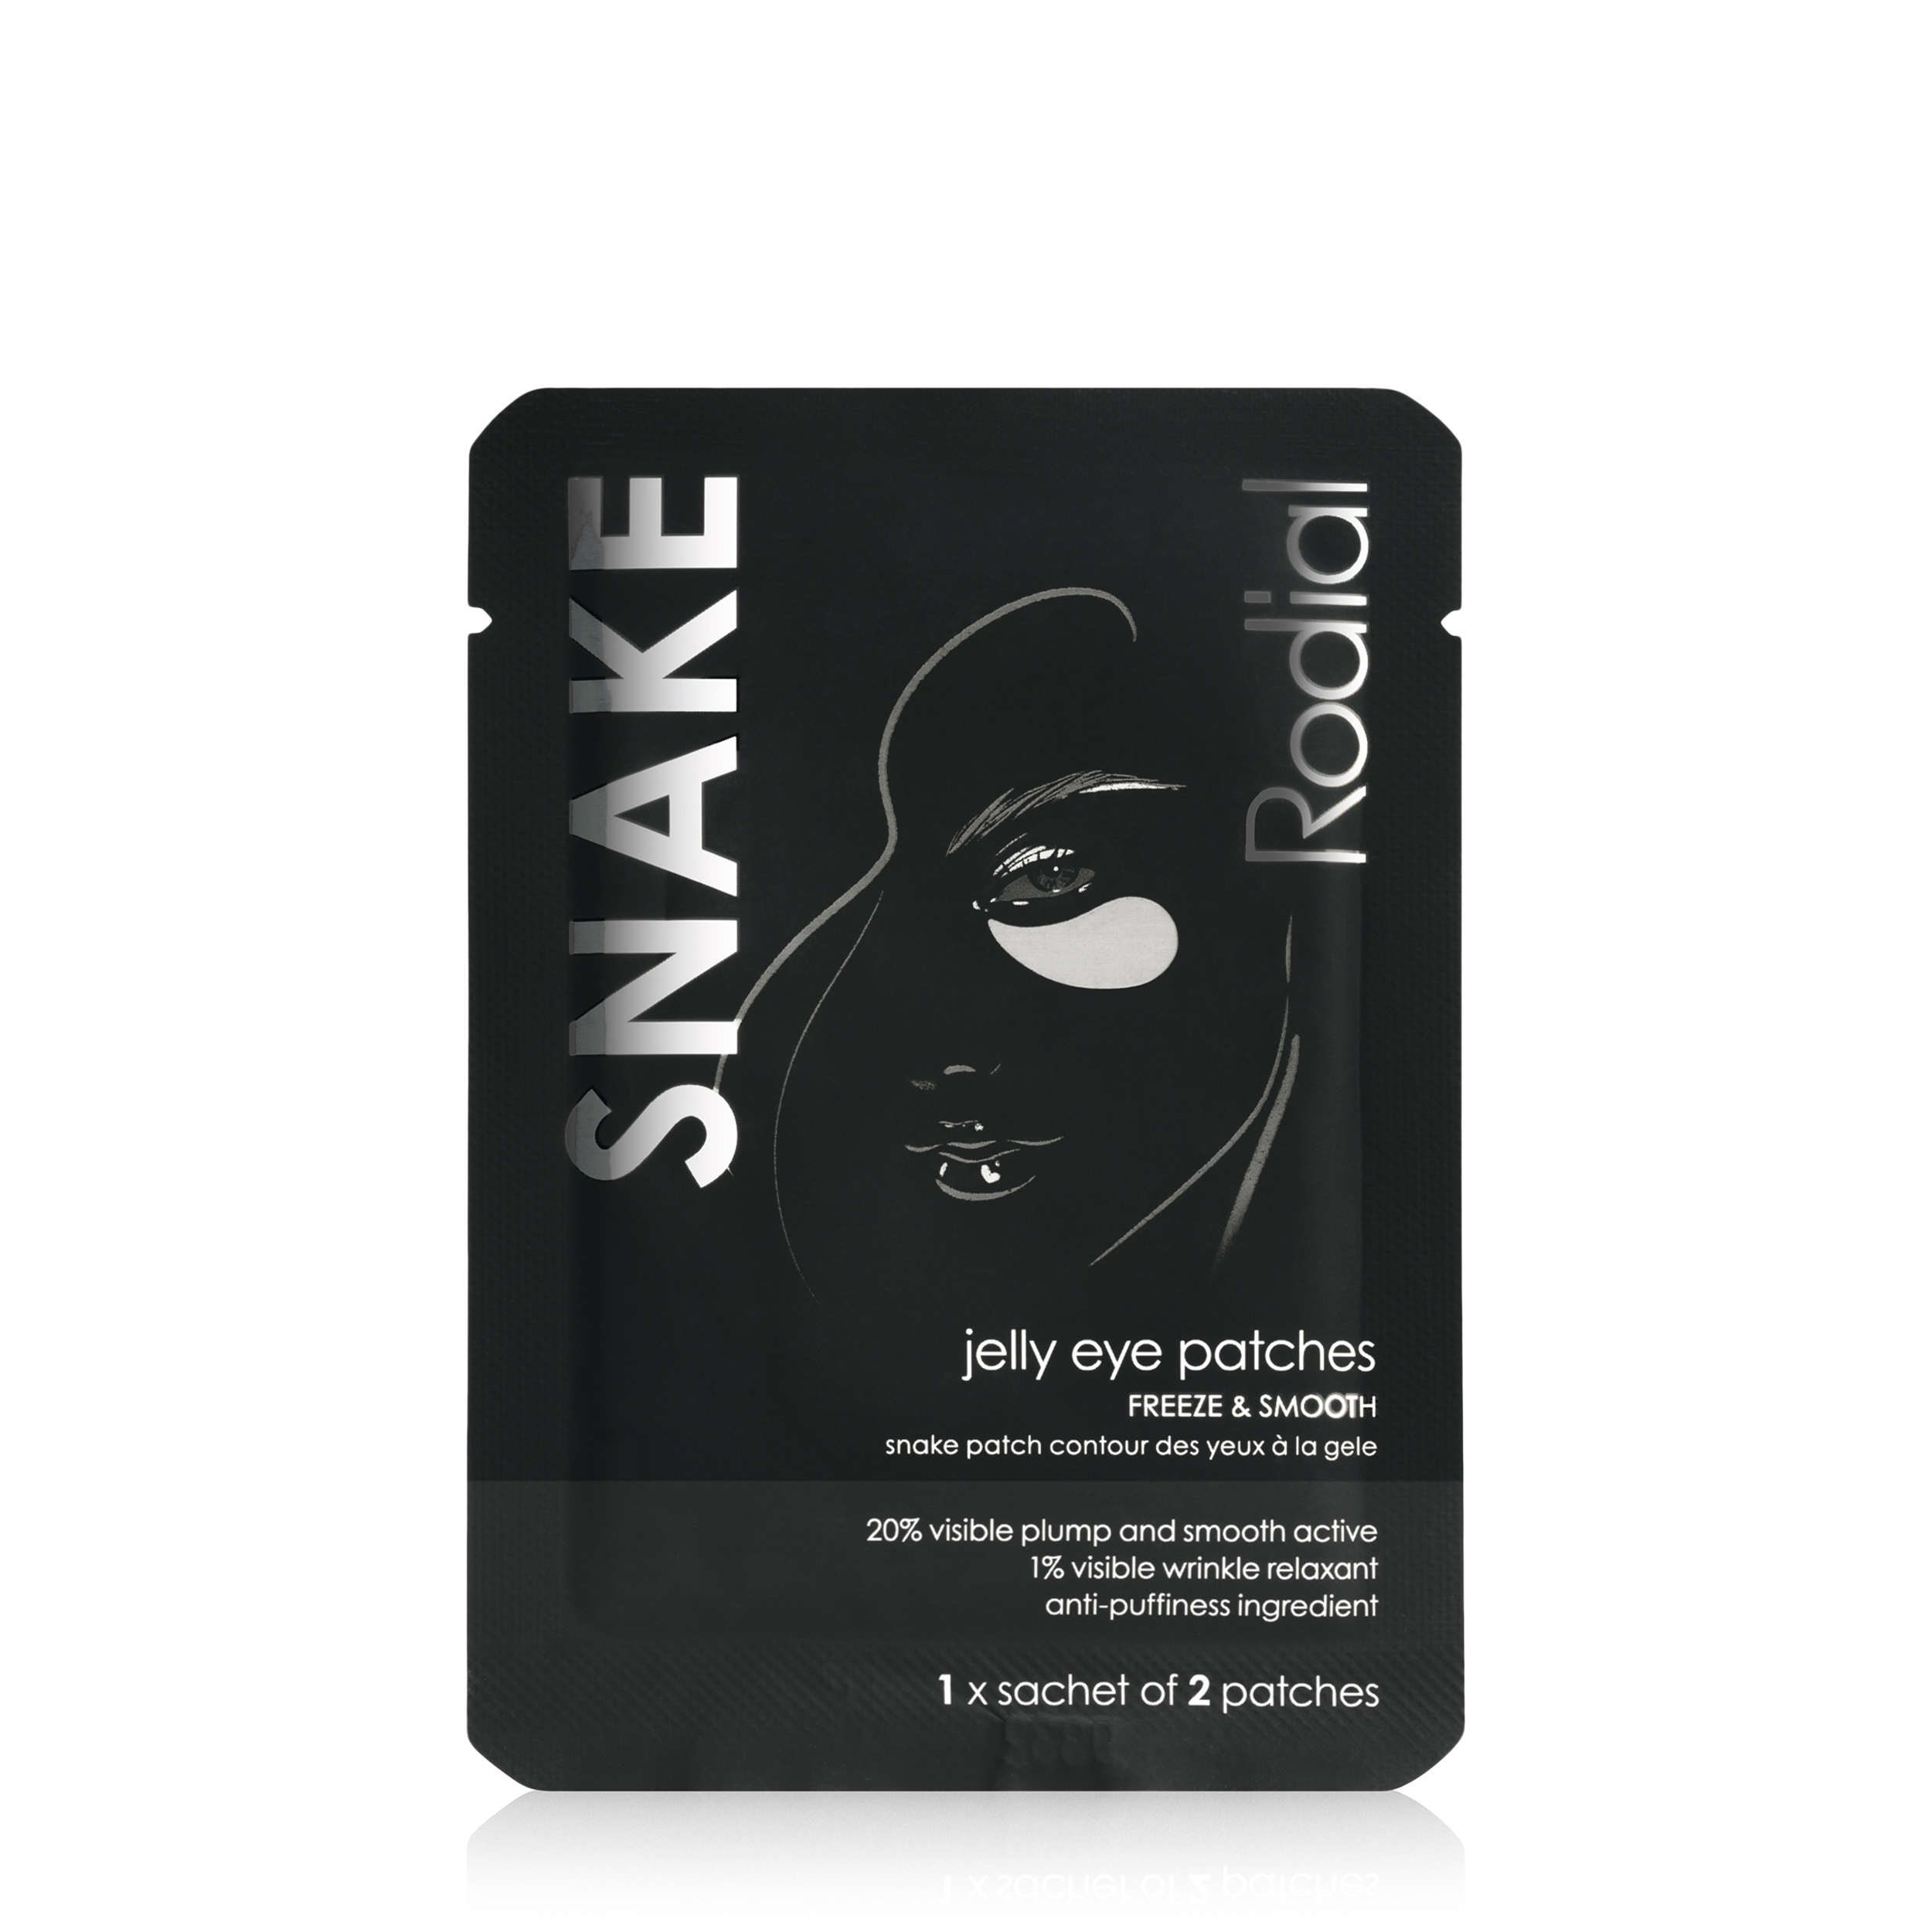 Rodial Rodial Патчи для глаз разглаживающие Snake Jelly Eye Patches 1шт от Foambox